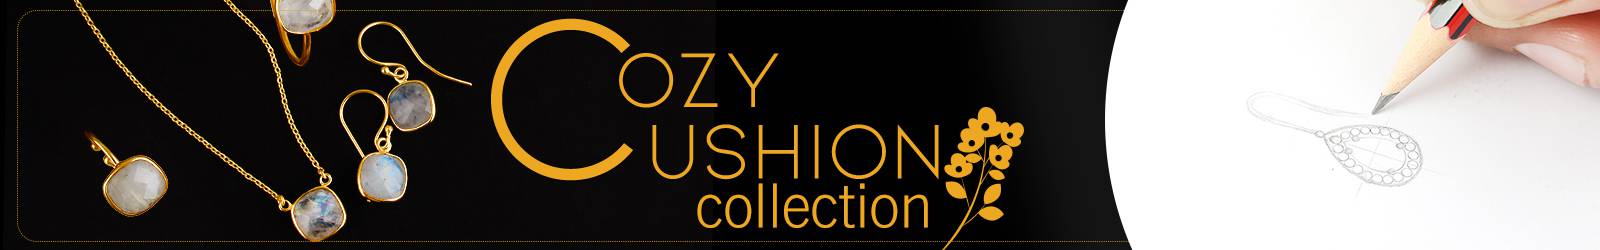 Online Wholesale Cozy Cushion Jewelry Collection